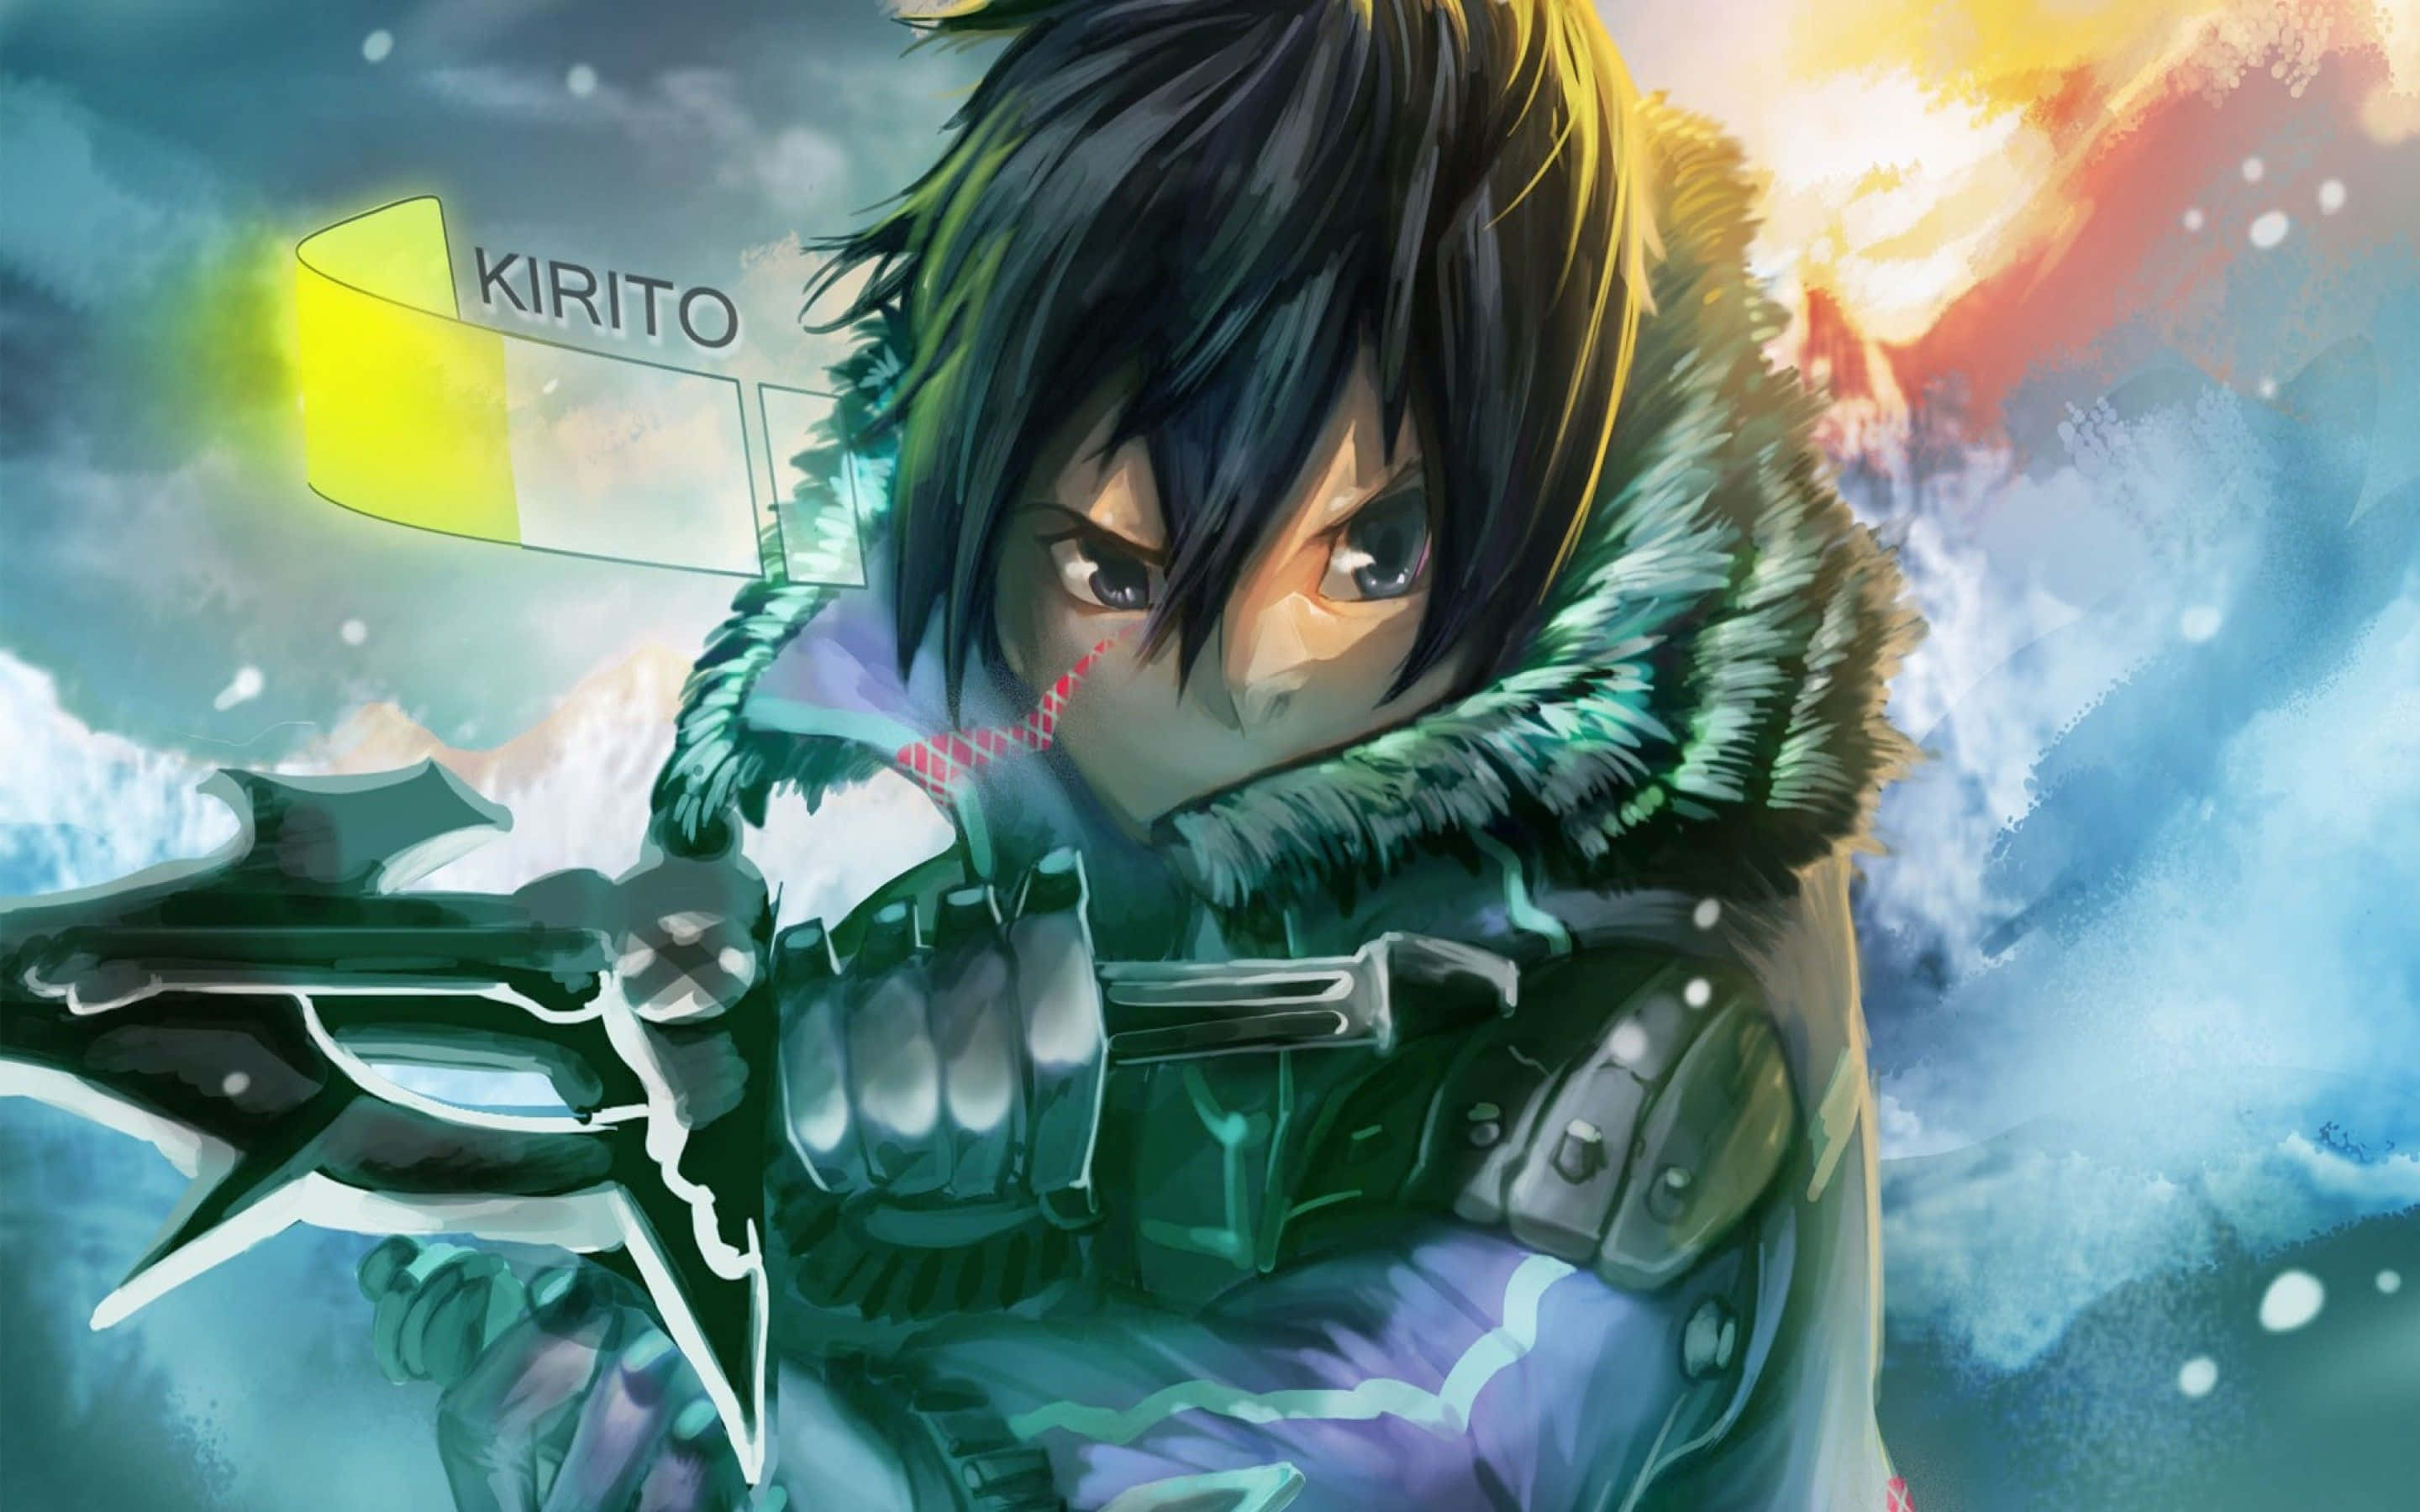 Sword Art Online gamers live out their destiny in the game's thrilling virtual world.